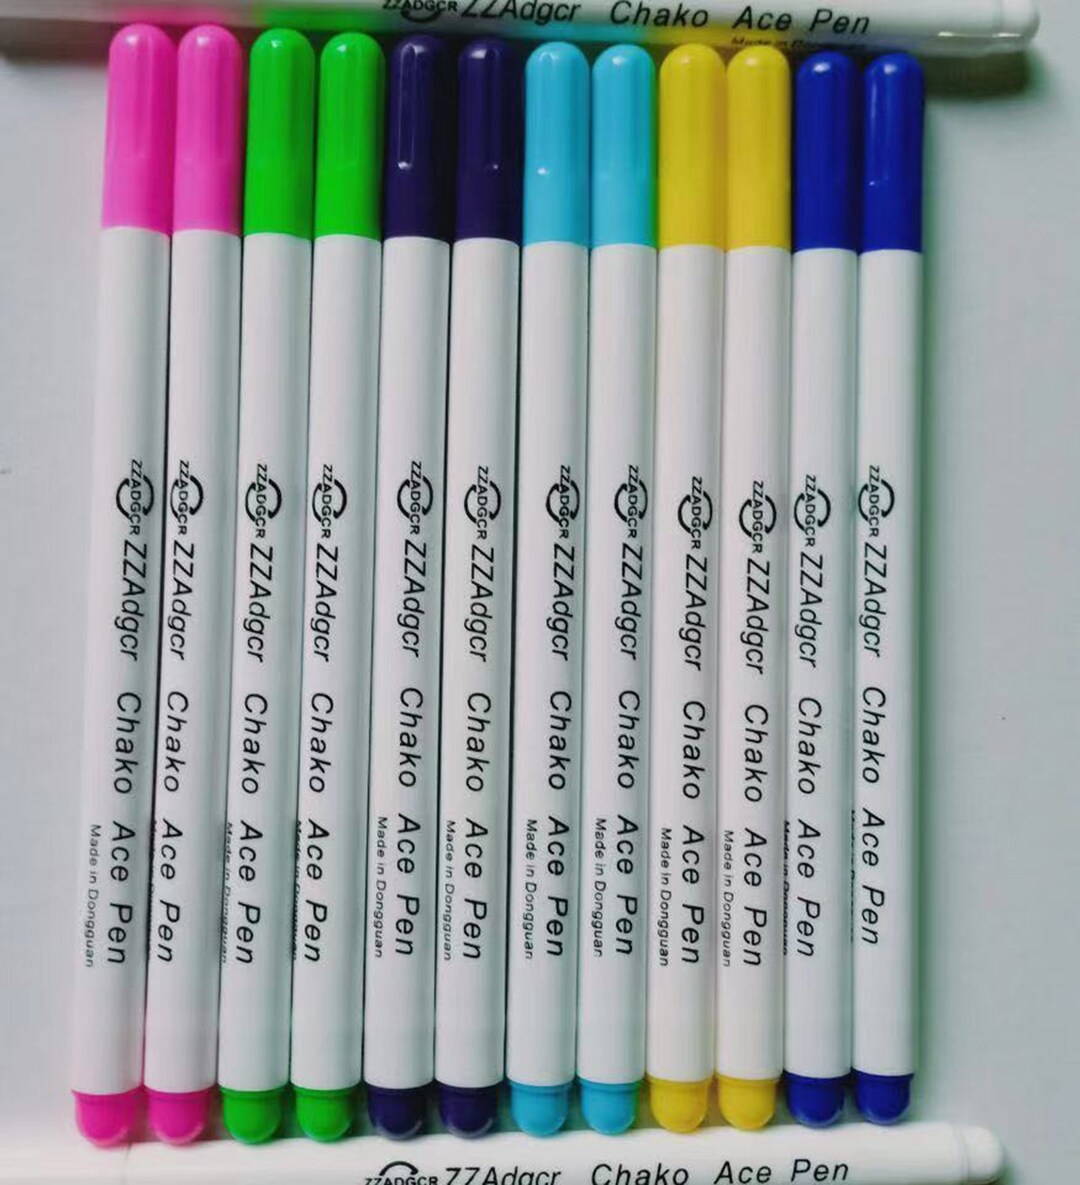 Chacopen Blue or Pink With Eraser water Soluble by CLOVER, Clover Marker,  Marking Tools Fabric, Water Erasable Pen, Water Soluble Pen 